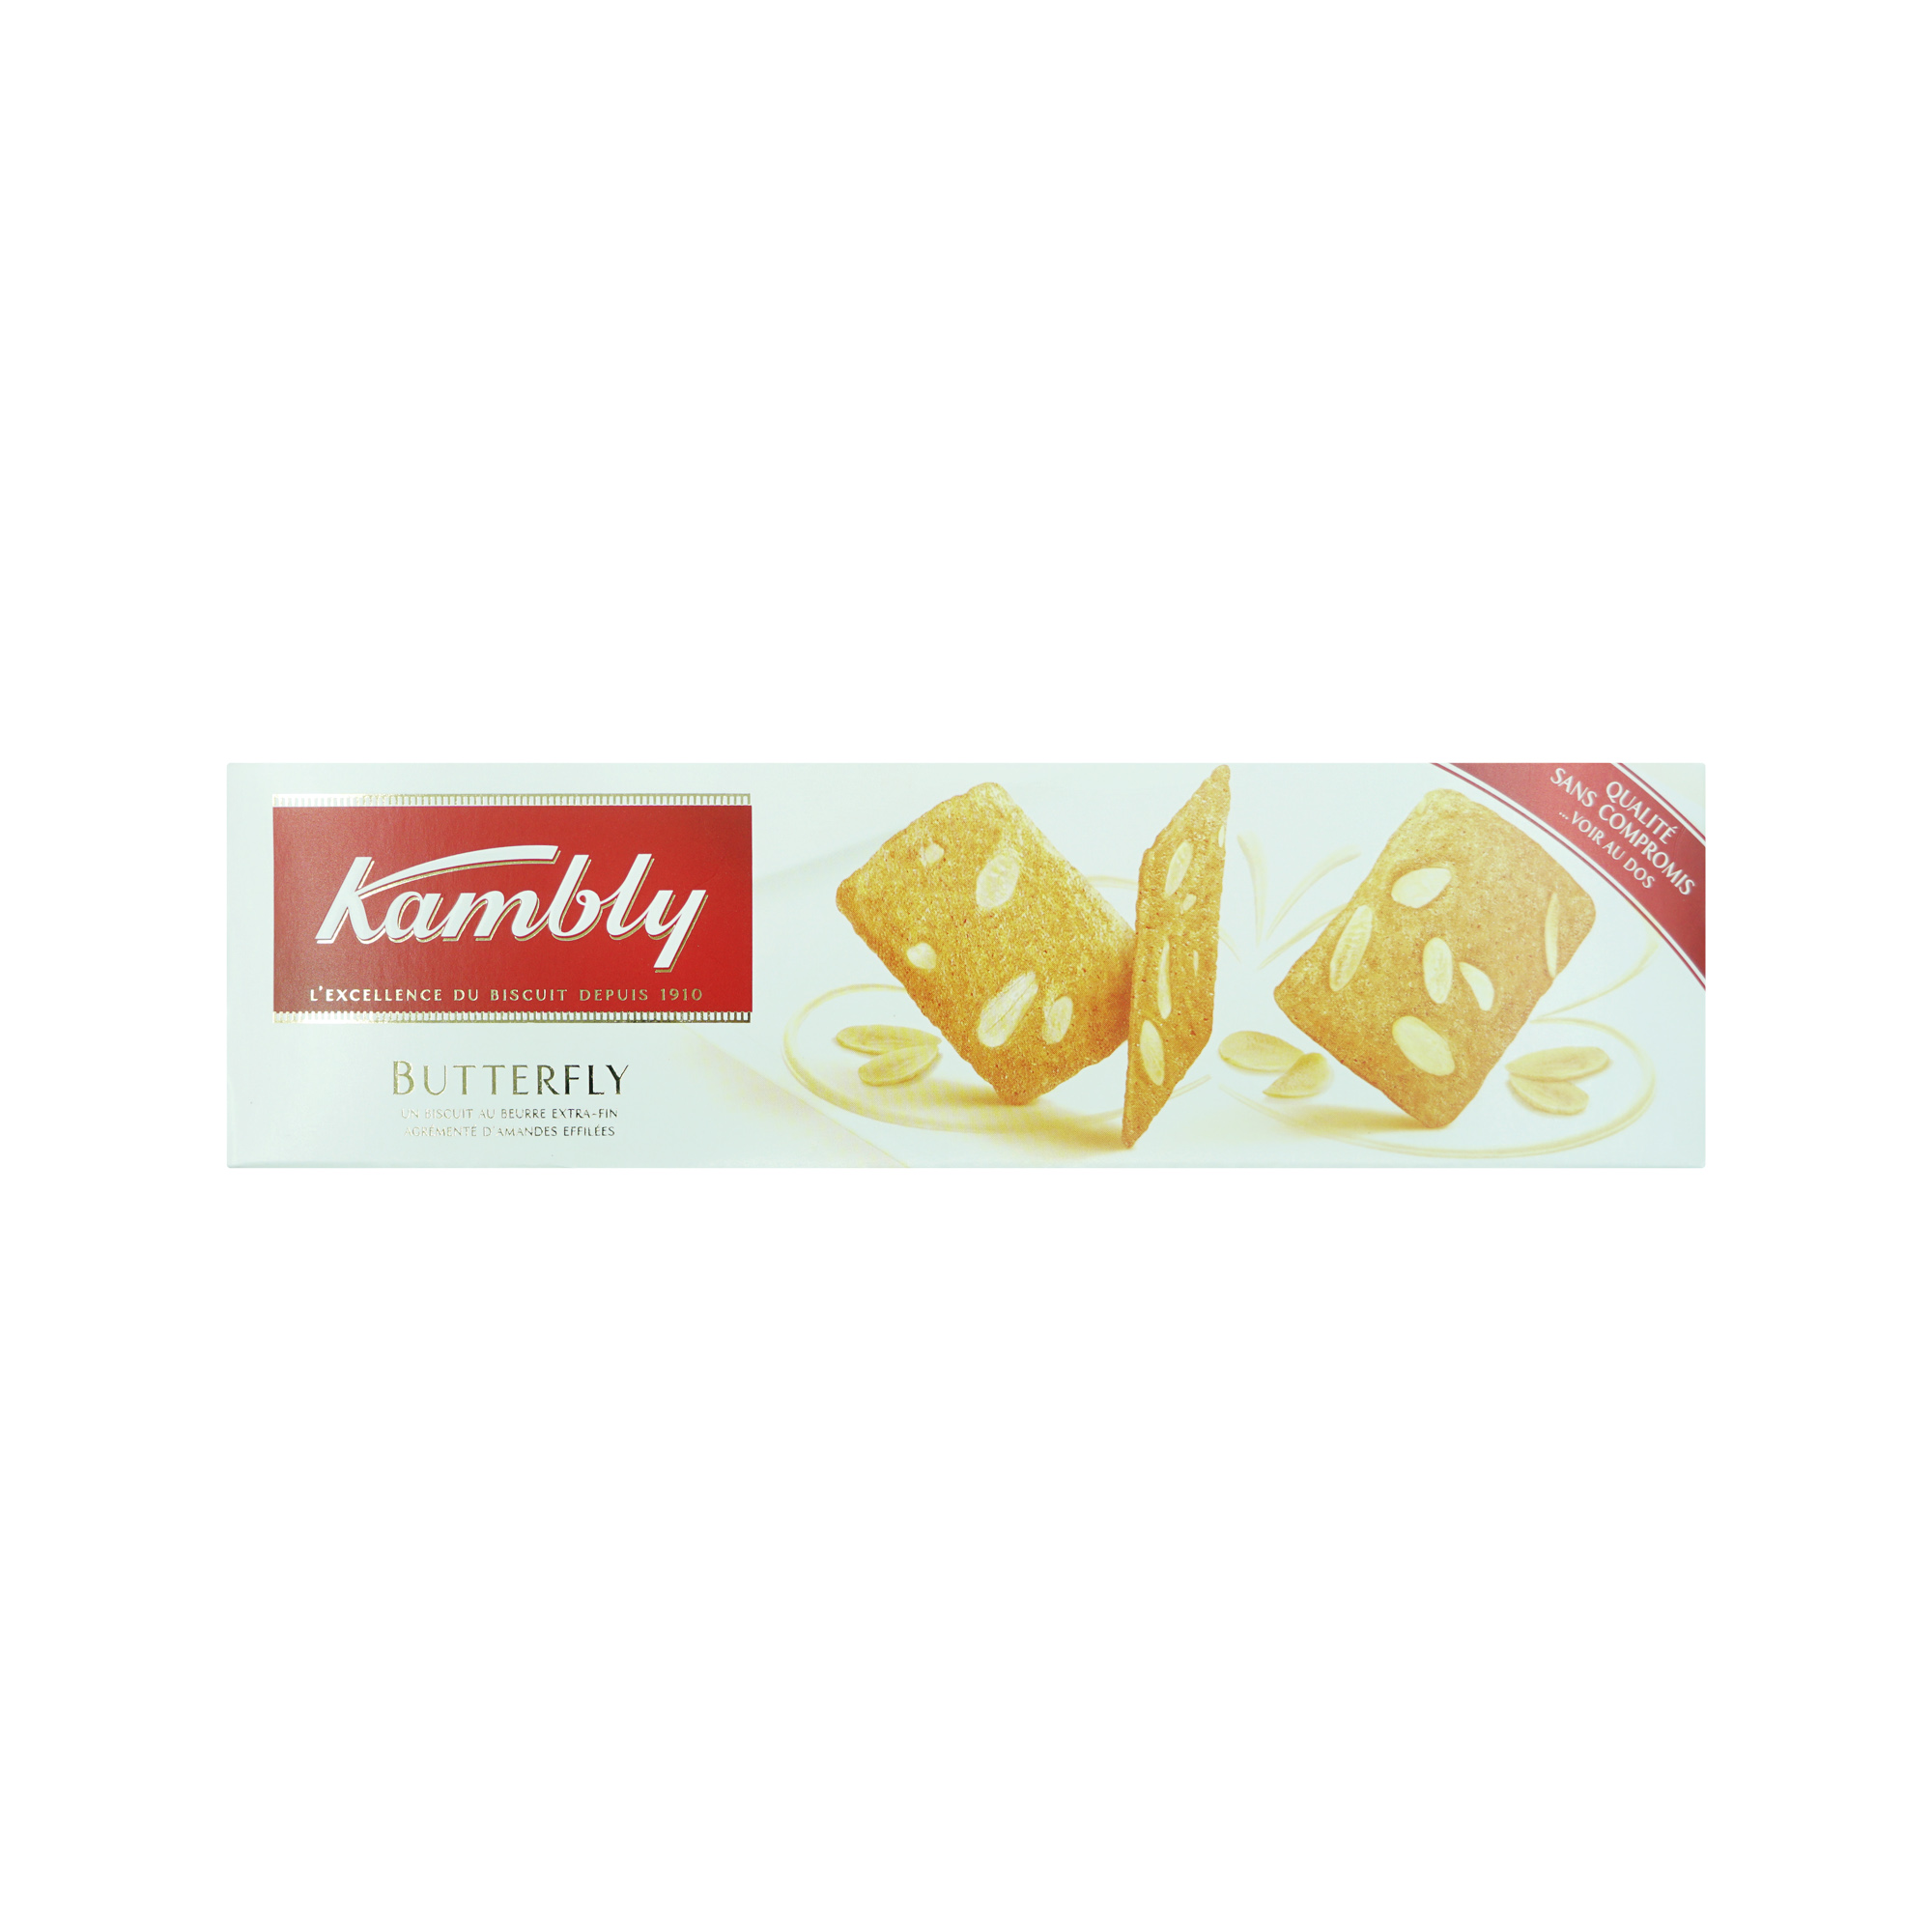 Kambly Butterfly Almond Biscuits (100g)